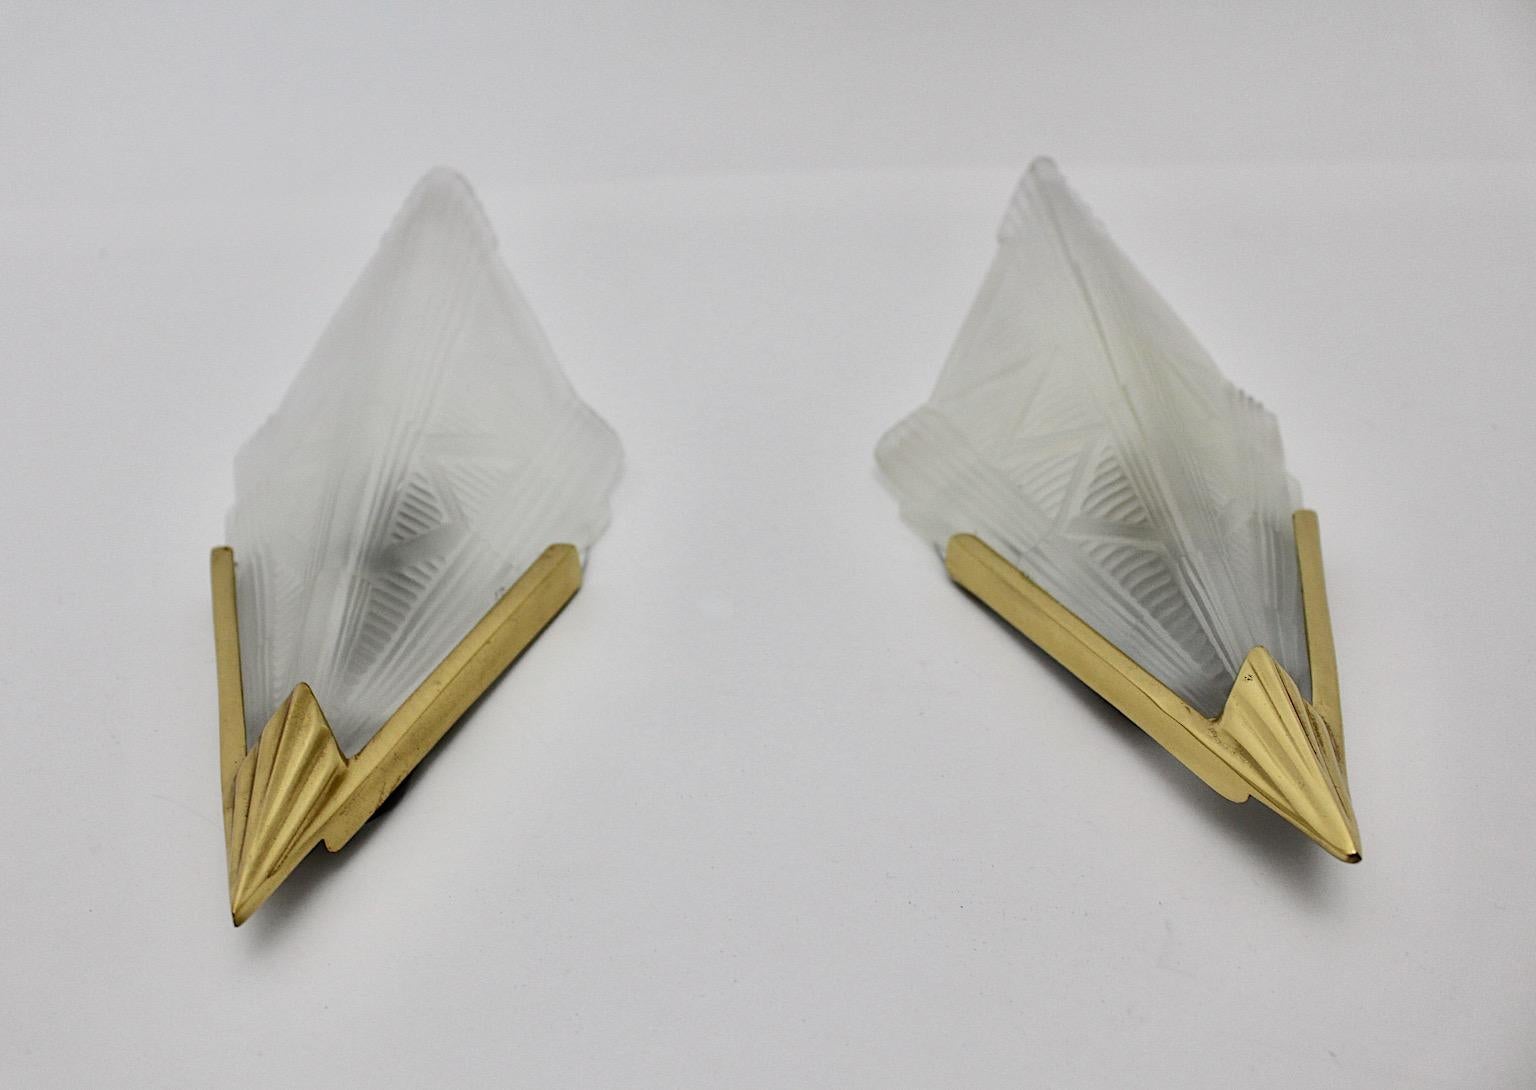 Art Deco style pair of wall lights or sconces in triangle shape from frosted glass, brass, metal and plastic Degue style, 1990s, Sweden.
A wonderful pair of sconces which shows frosted pressed milky glass shades with structured pattern supported by